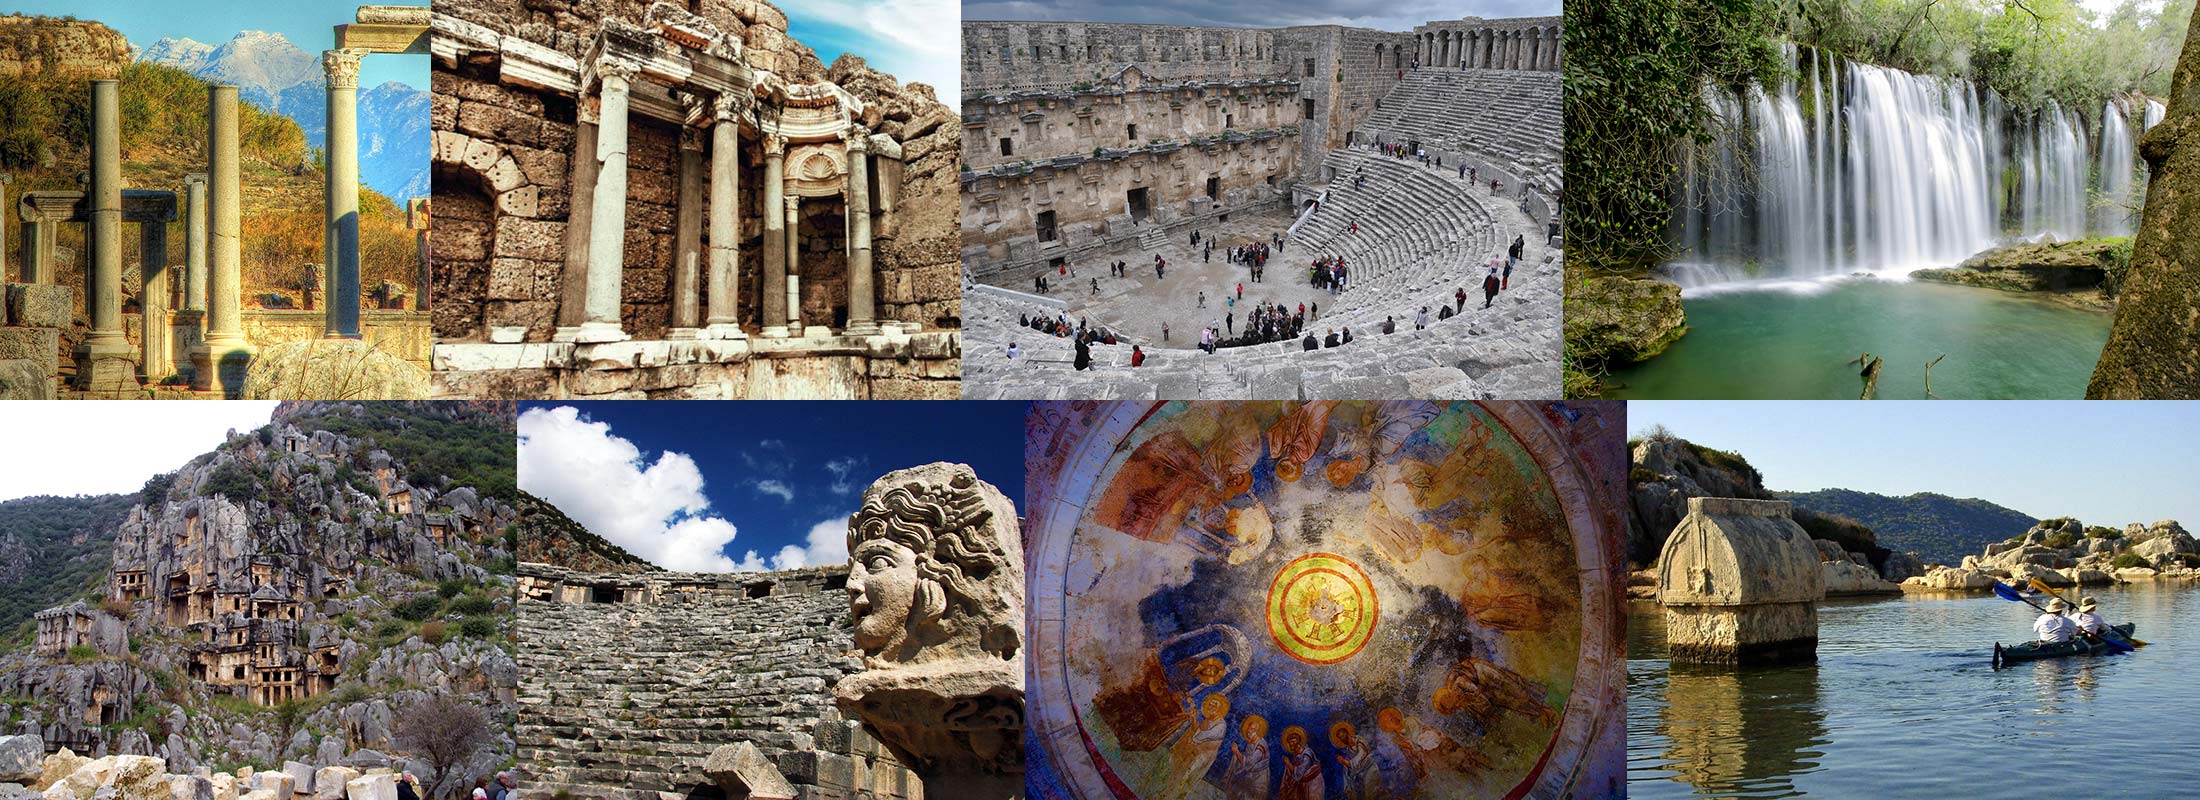 2-days-antalya-package-tours-by-bus